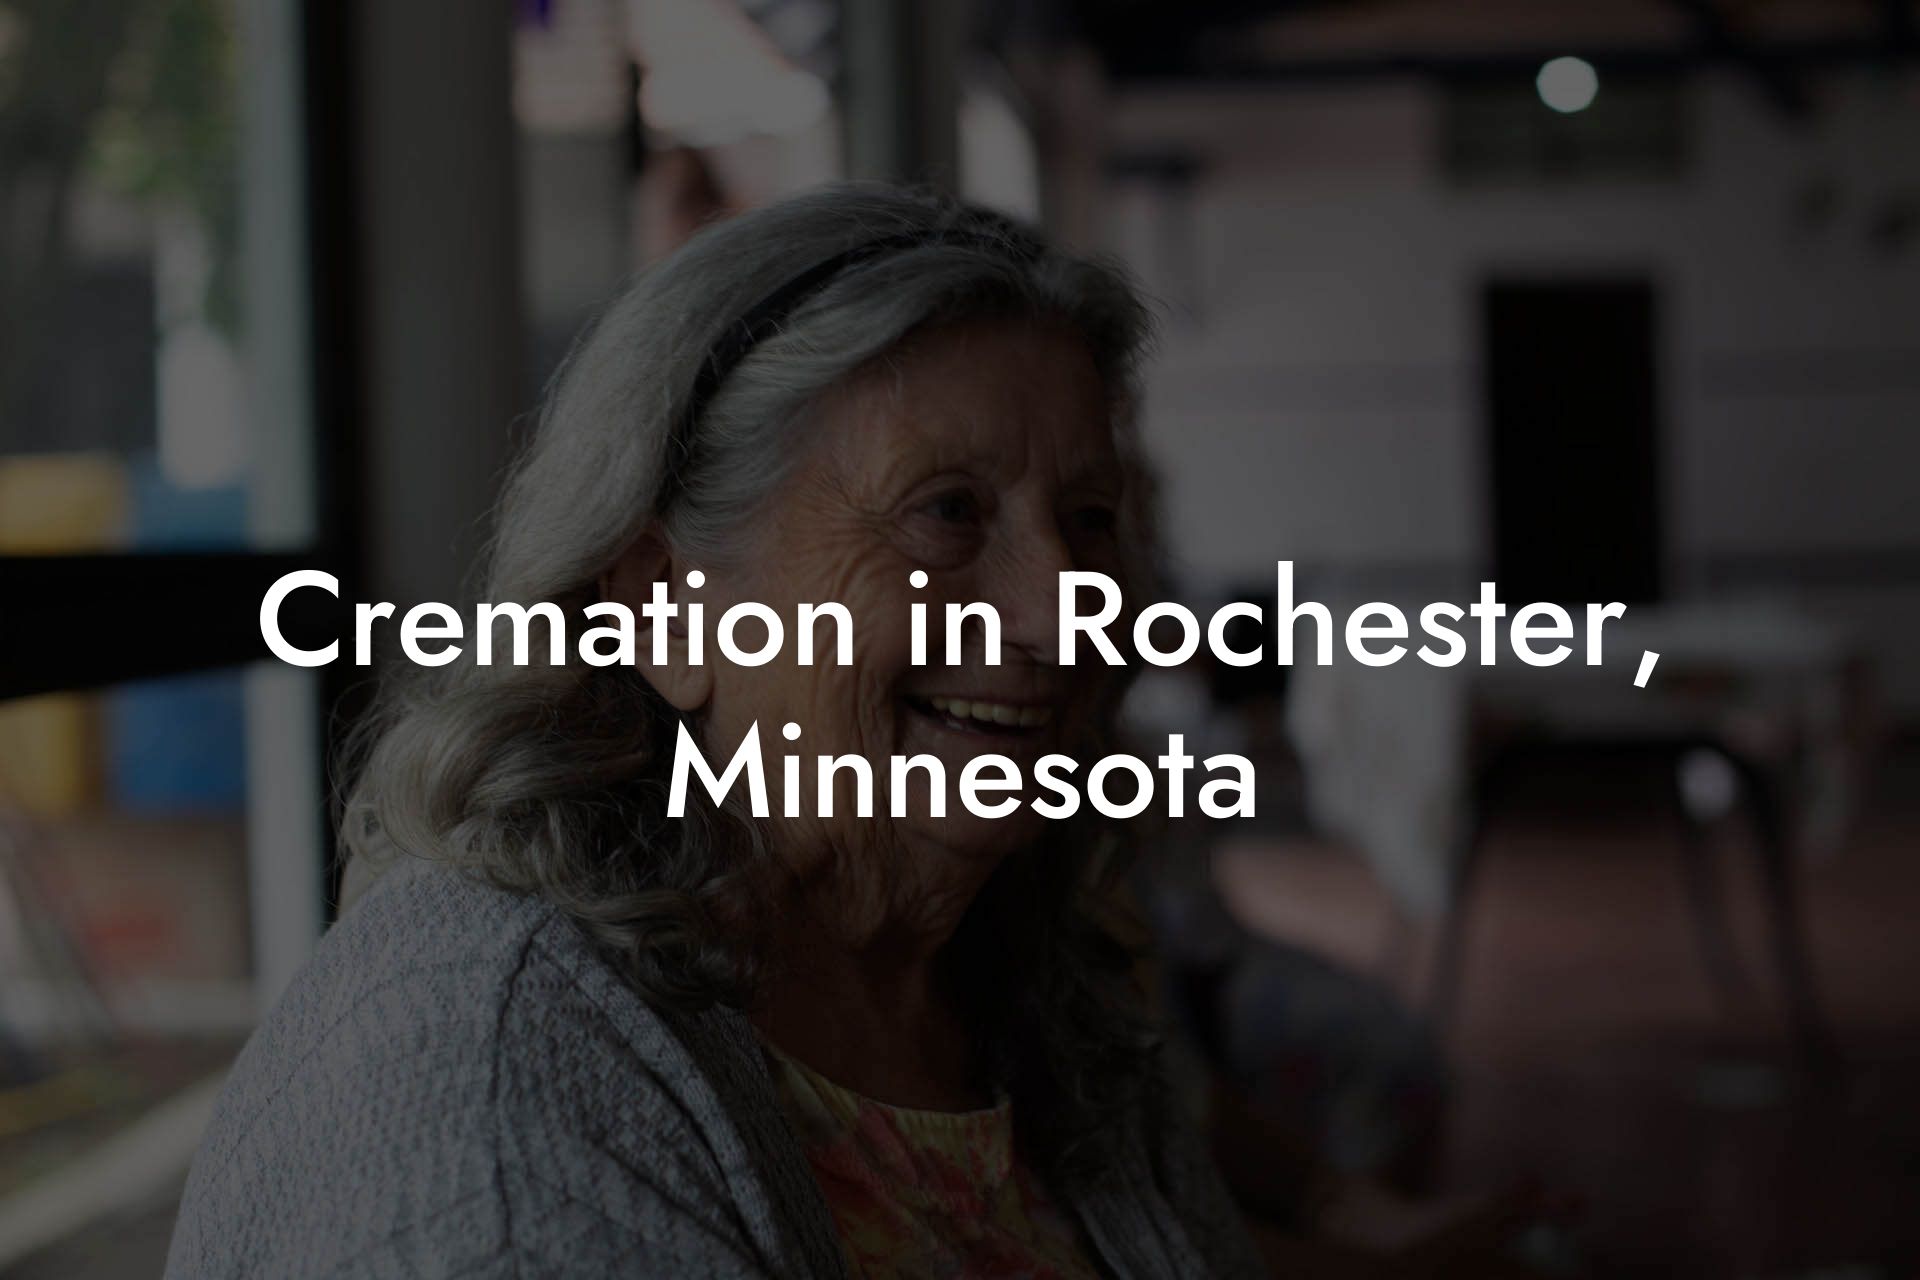 Cremation in Rochester, Minnesota